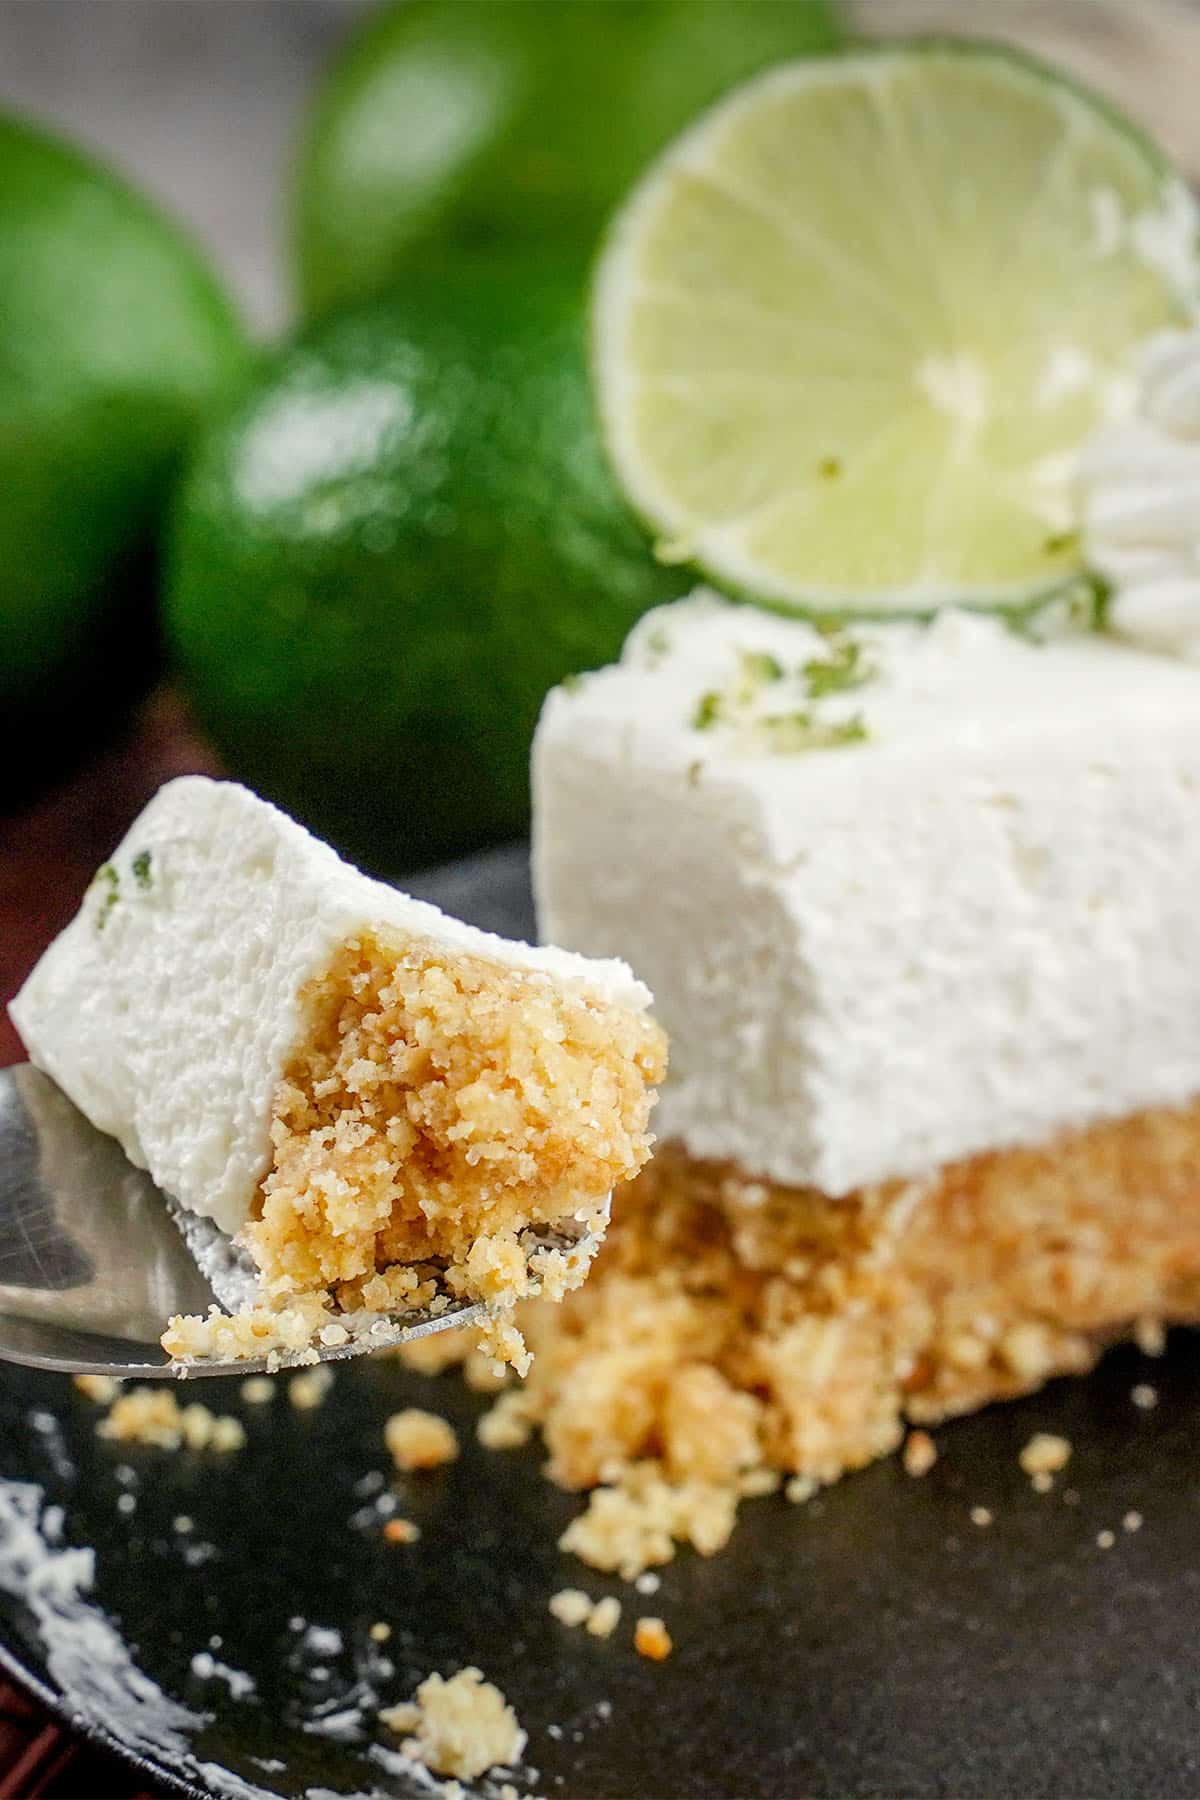 Take a scrumptious bite out of this Key Lime Cheesecake.